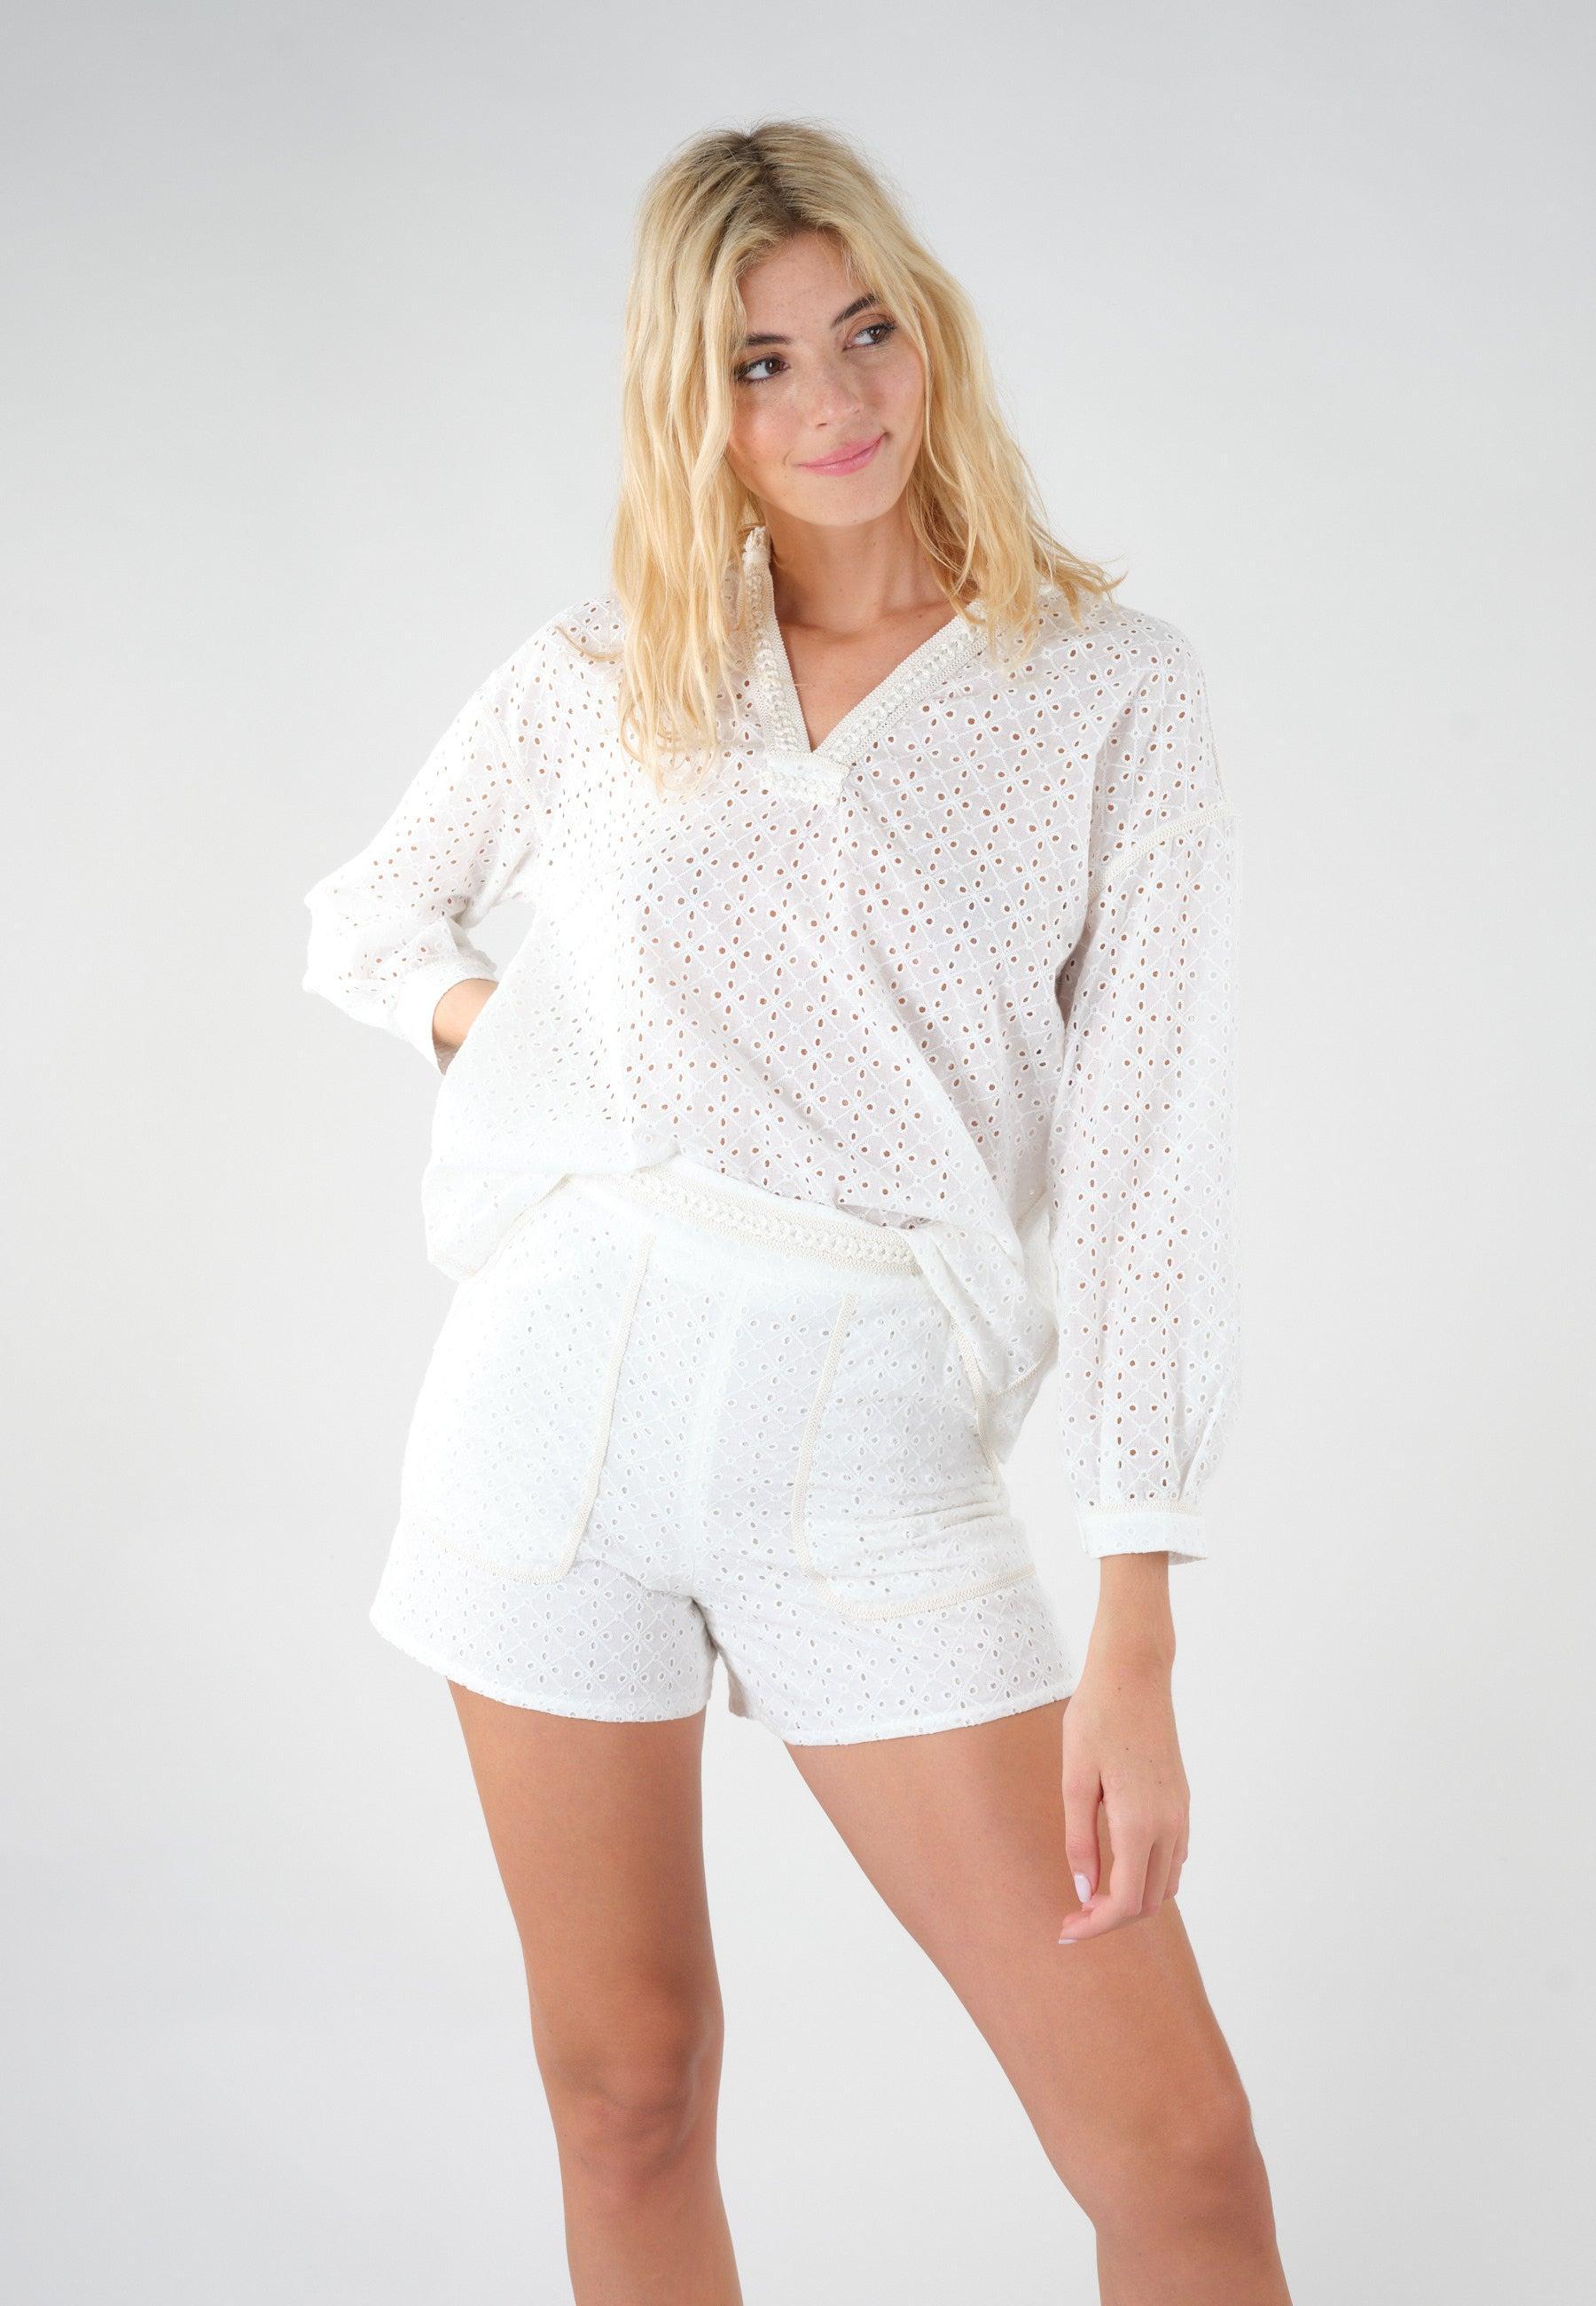 Deeluxe China Blouse Product Image